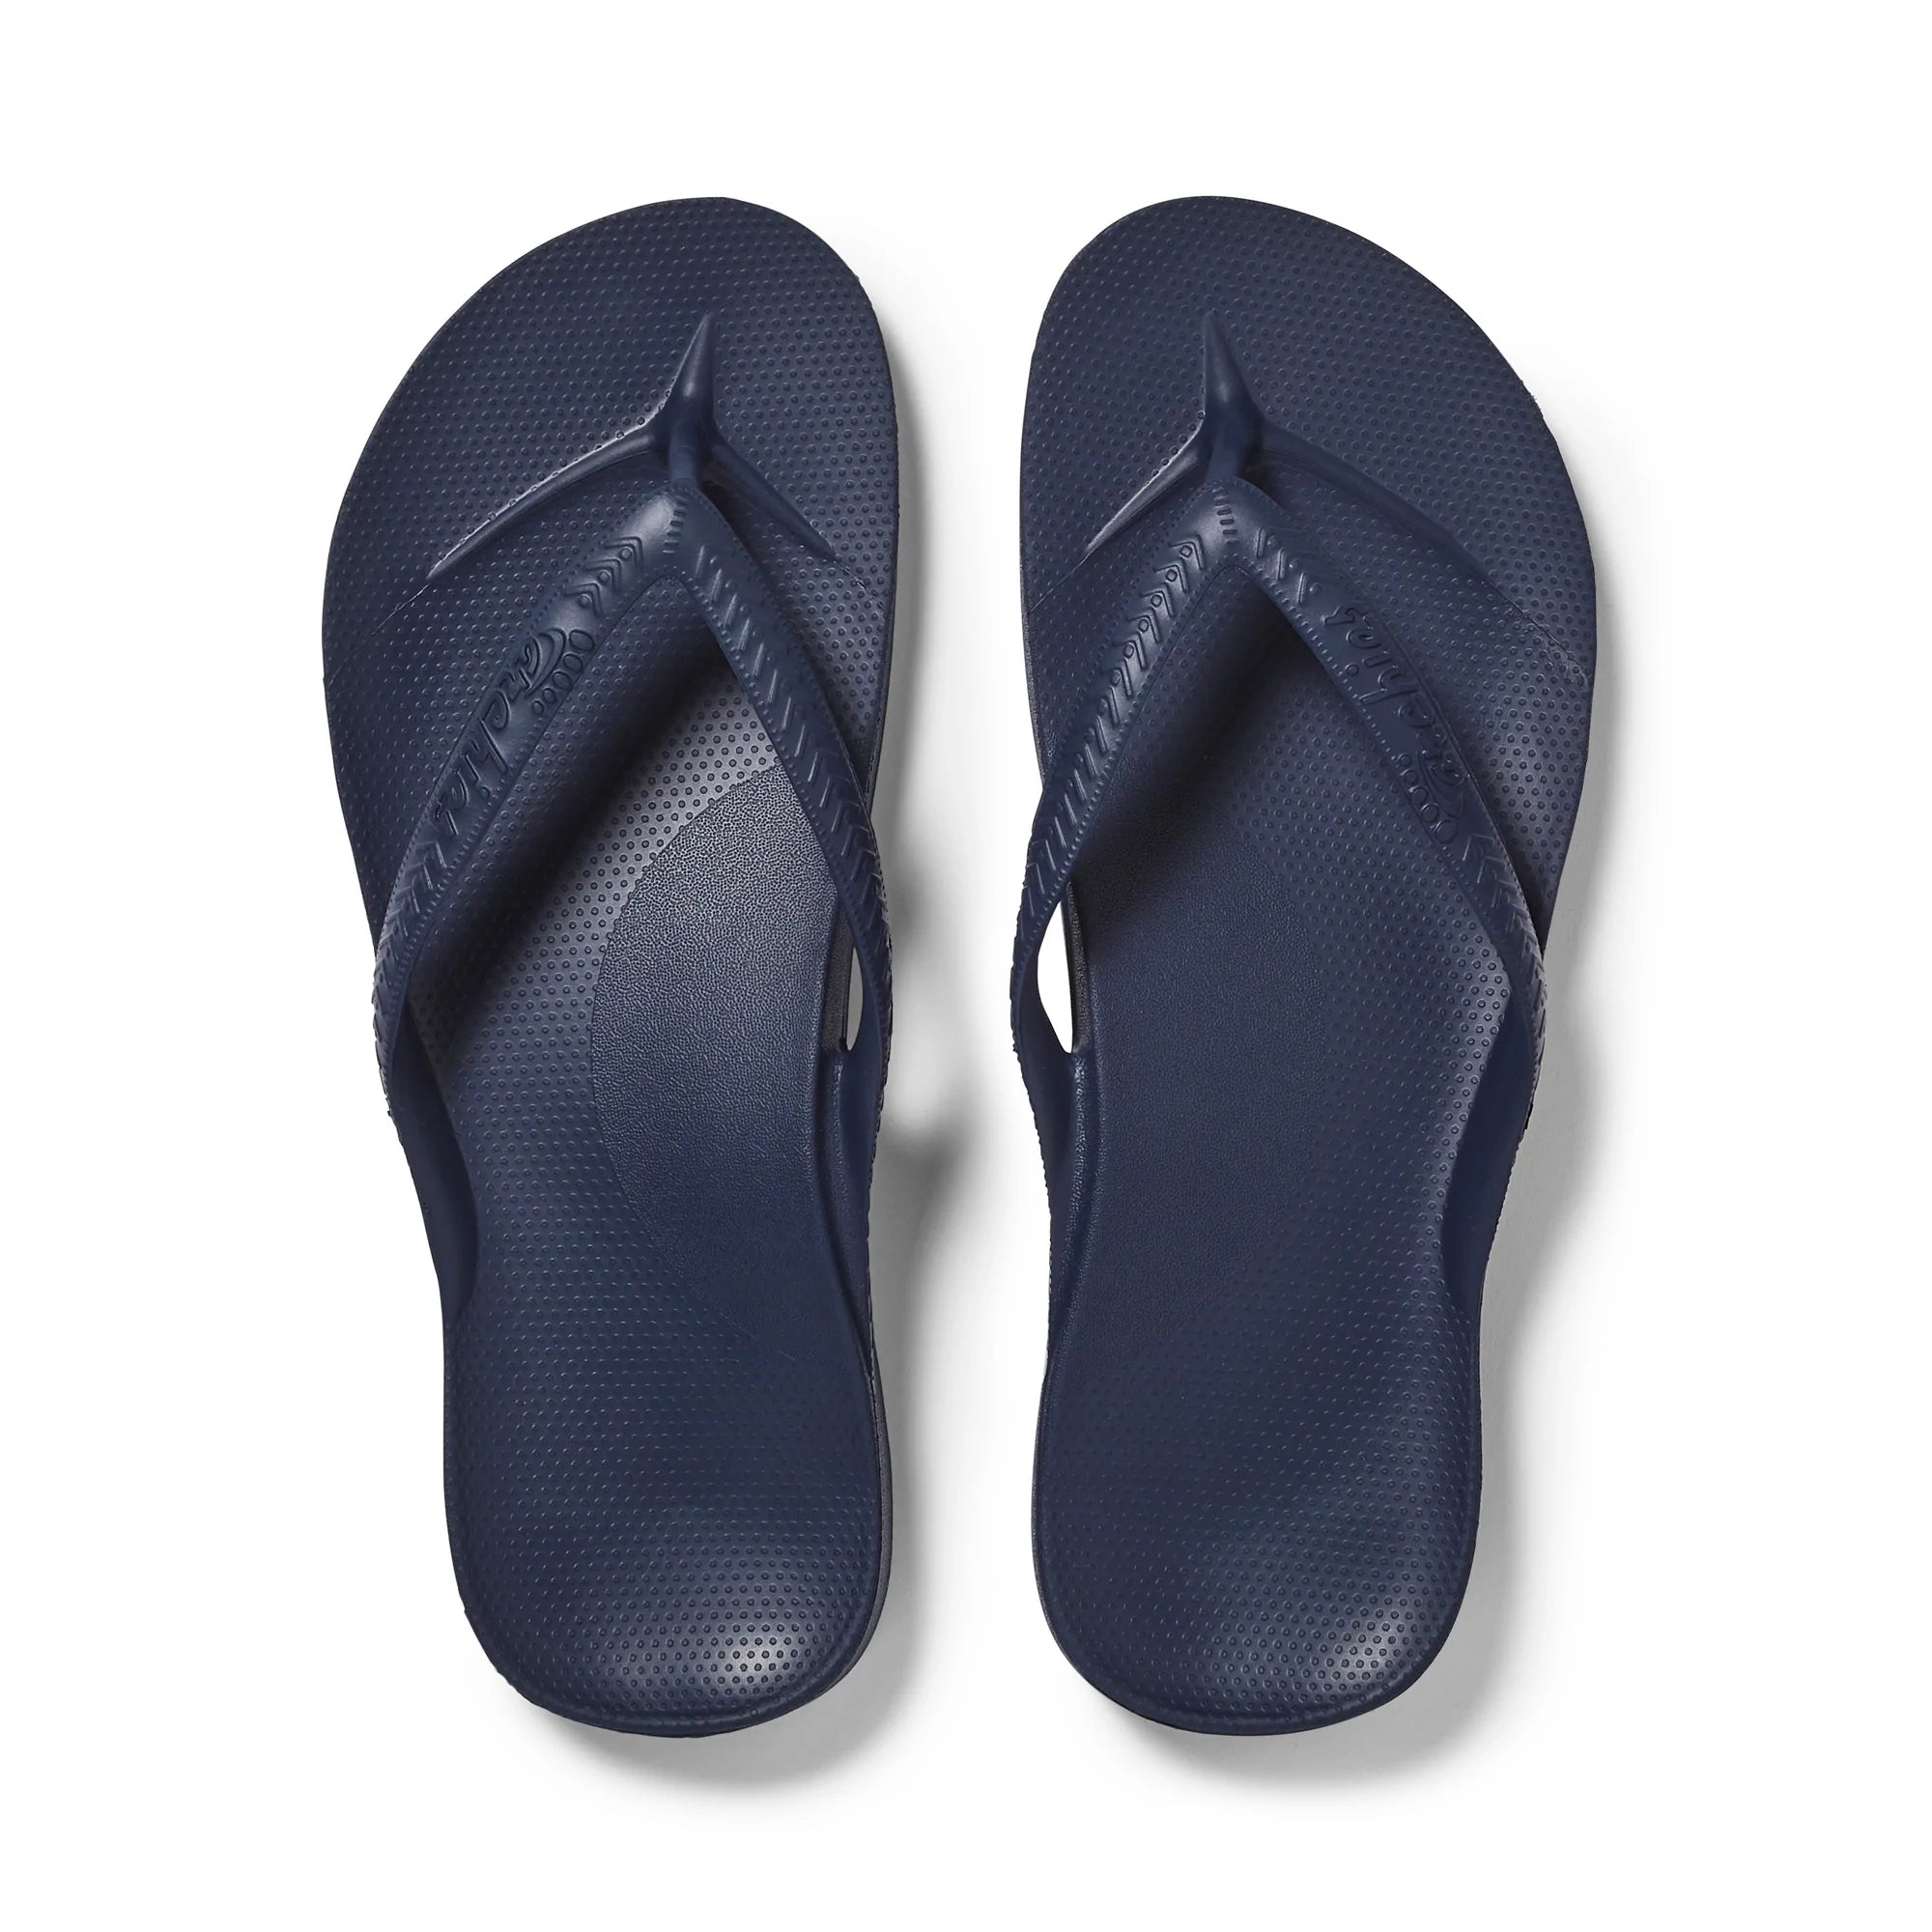 Archie’s Navy - Arch Support Jandals